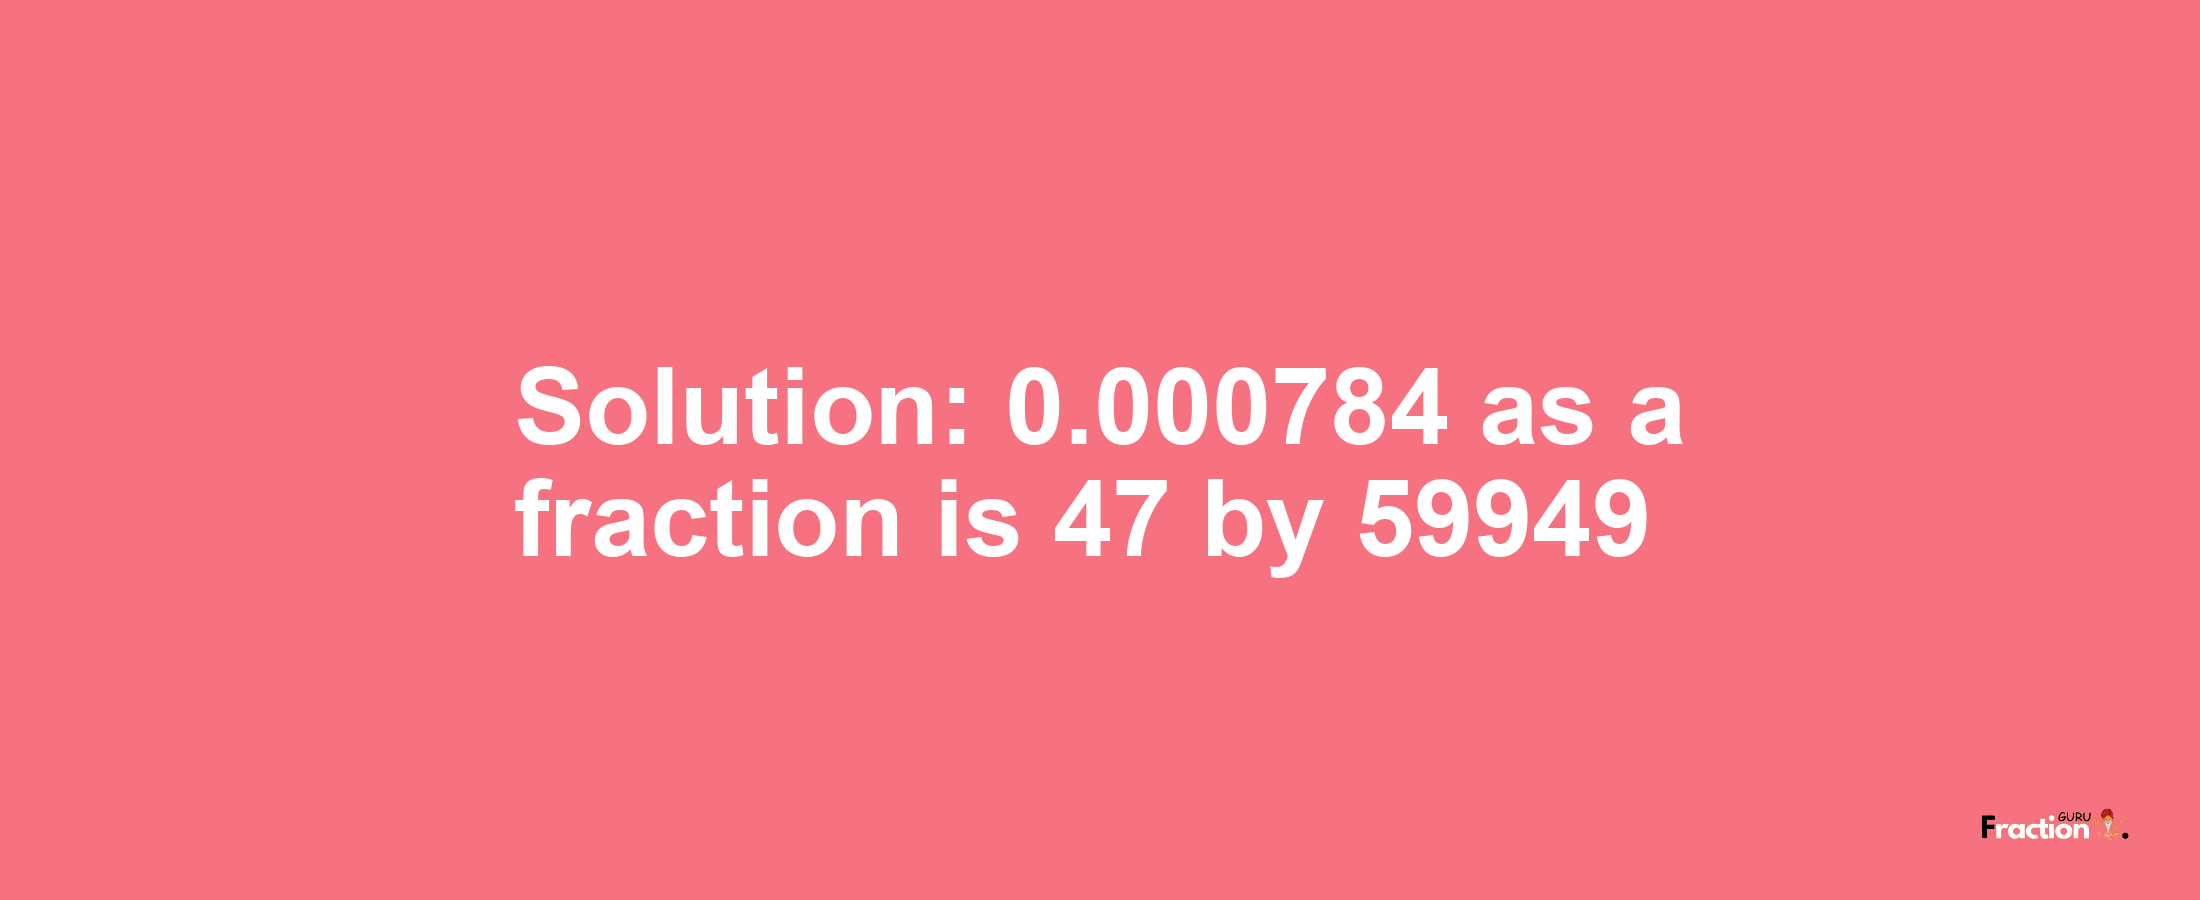 Solution:0.000784 as a fraction is 47/59949